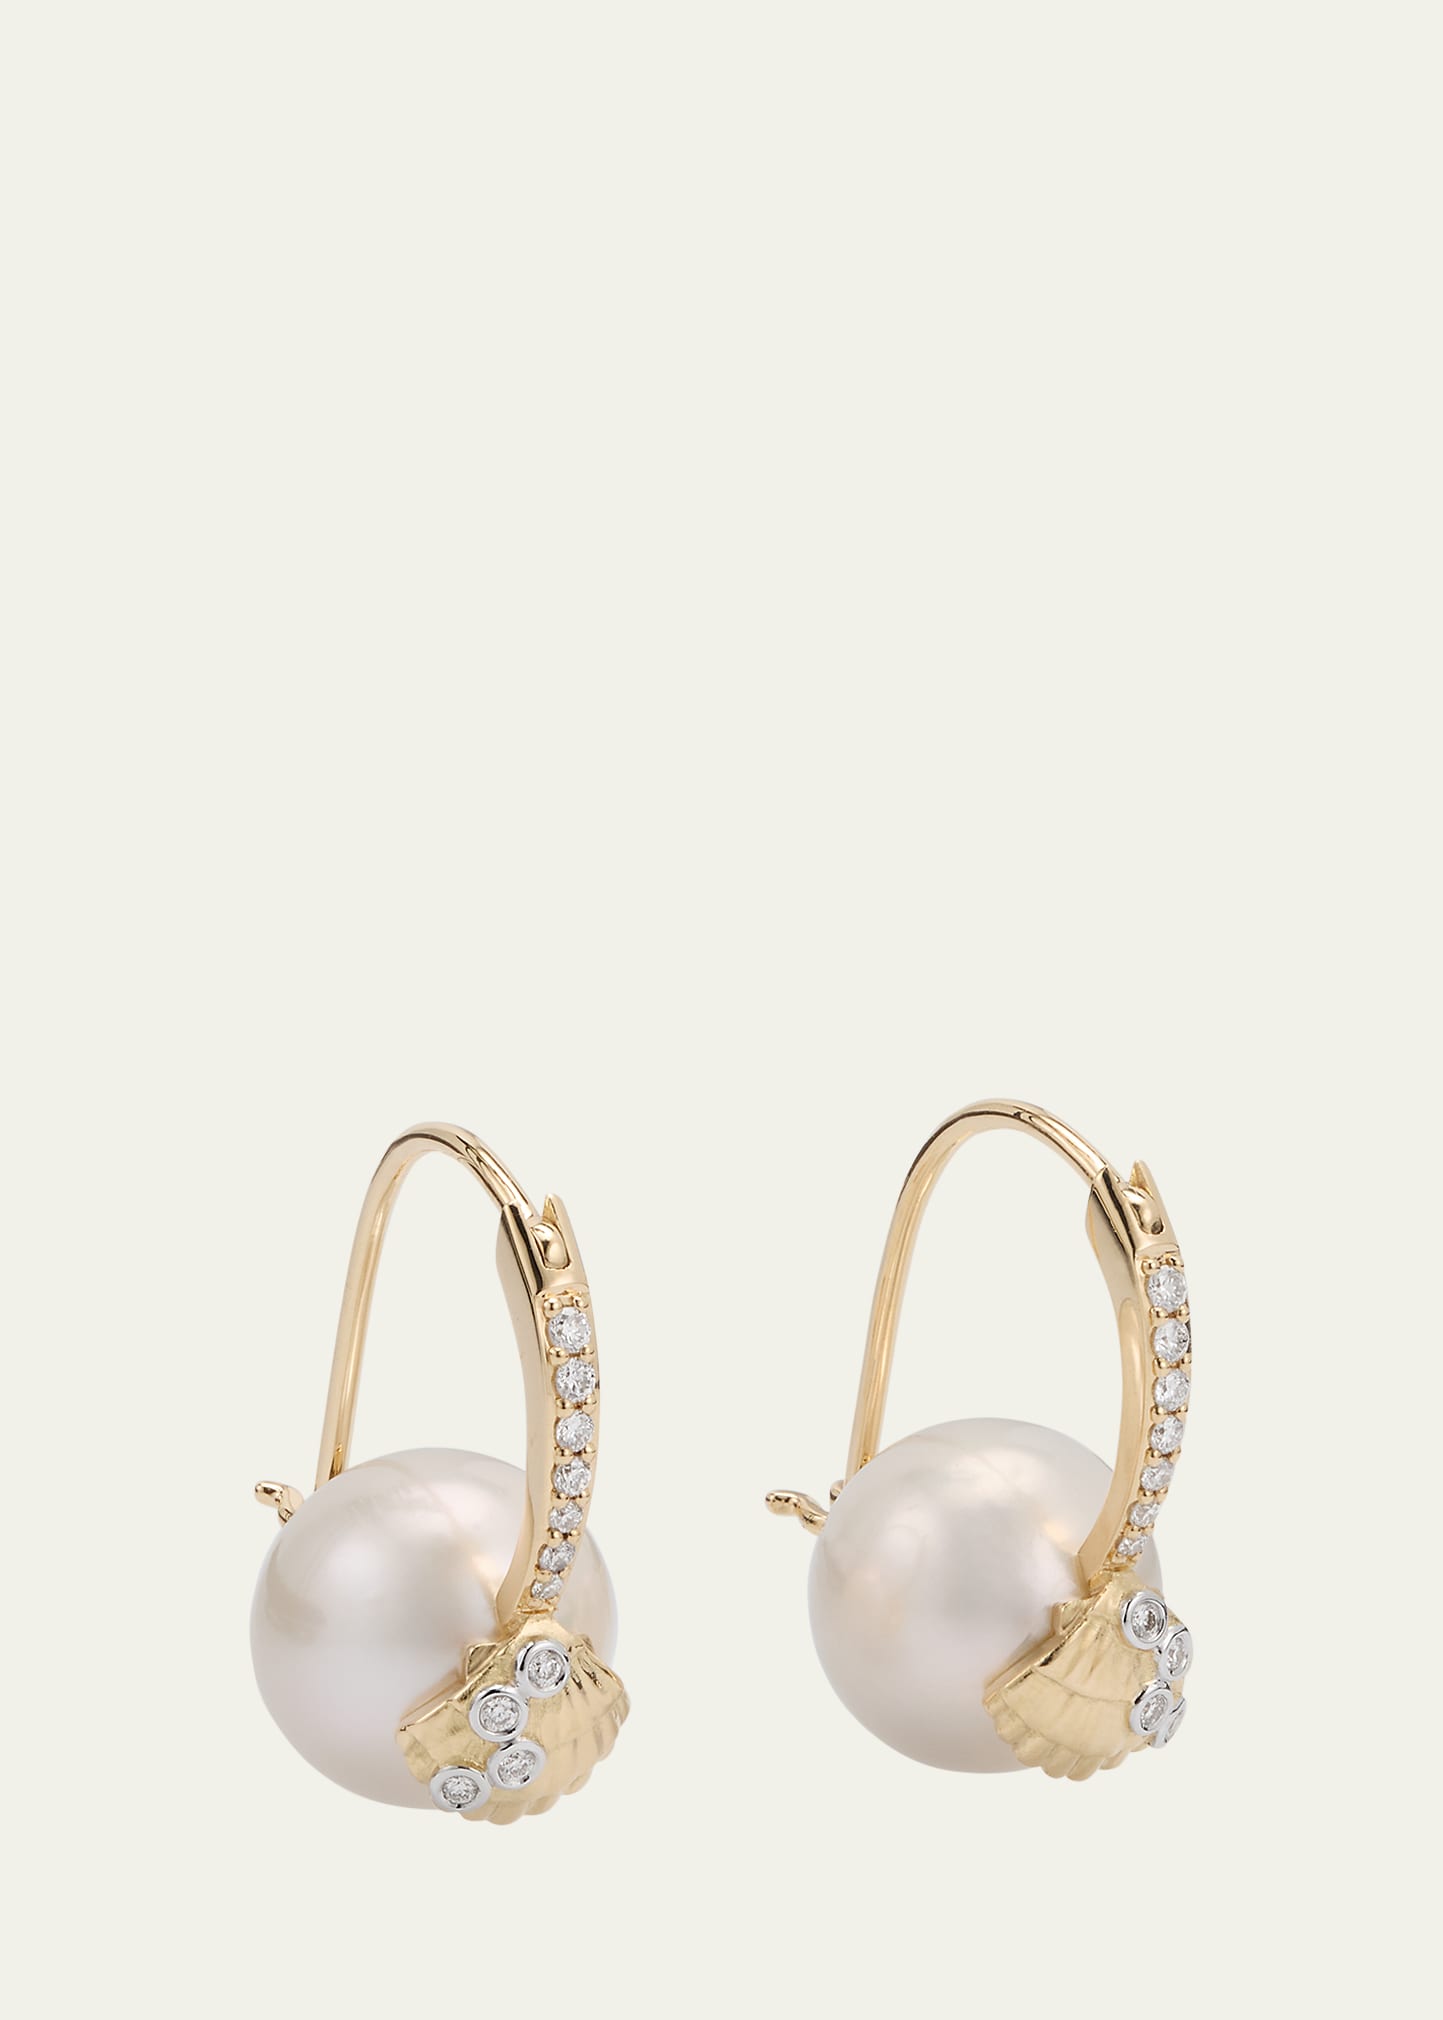 14K Gold Clamshell and 10mm Freshwater Pearl Diamond Earrings